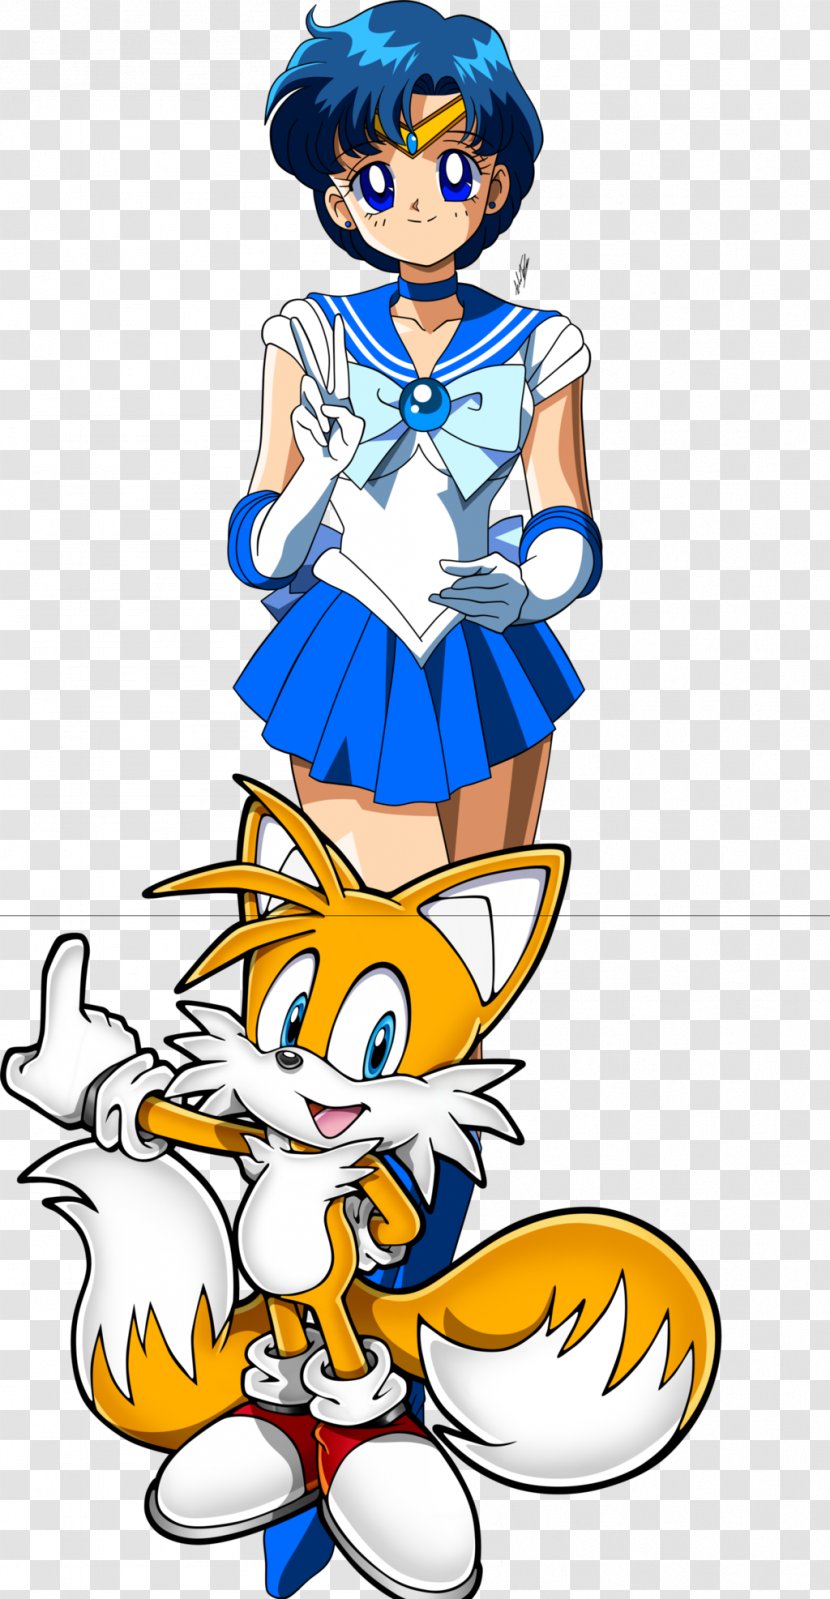 Tails Sailor Mercury Video Game Character Sonic The Hedgehog - Frame - Silhouette Transparent PNG